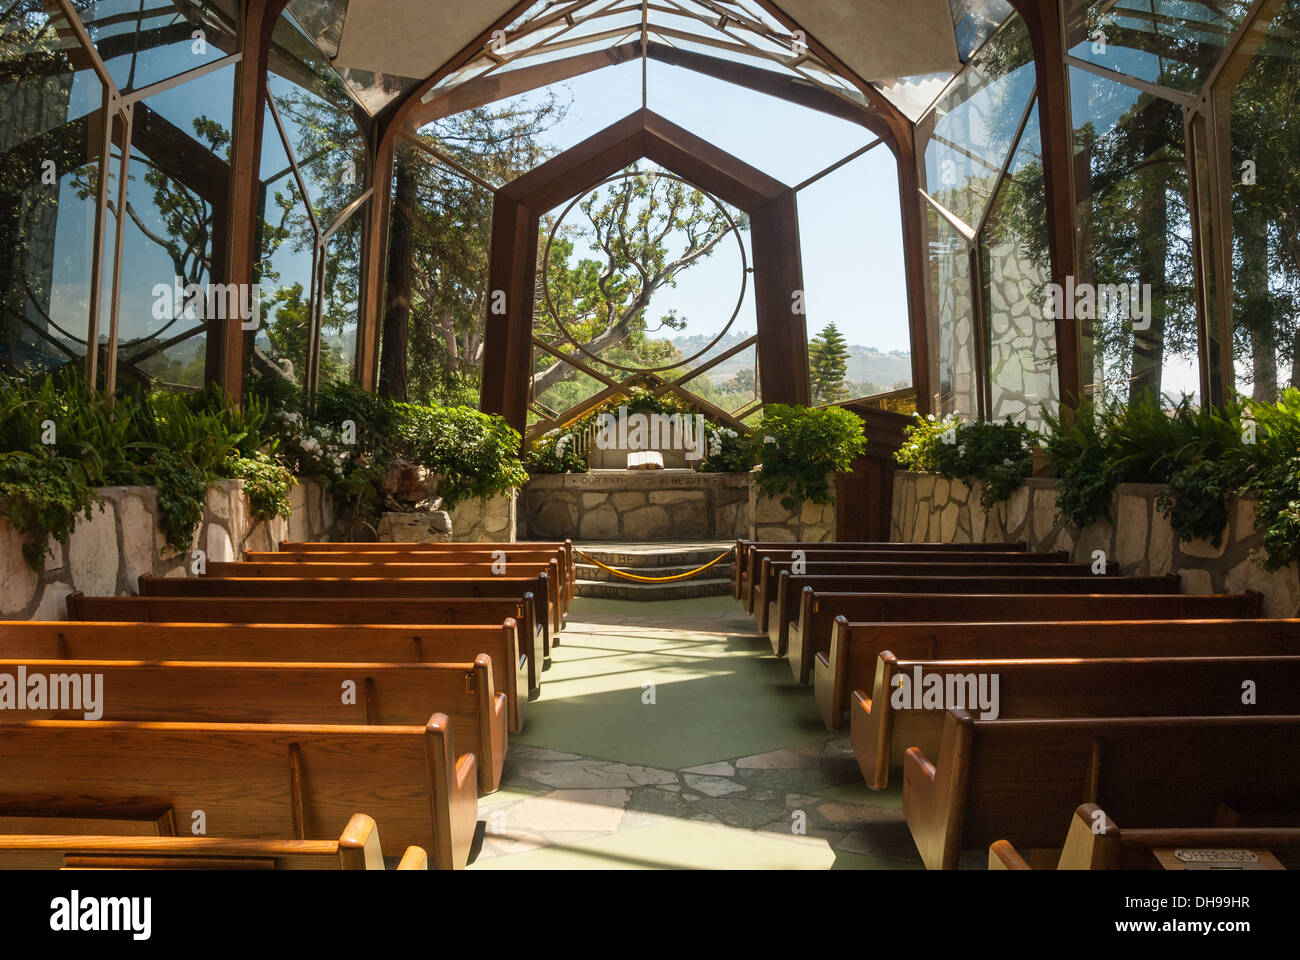 Wayfarers Chapel, designed by Lloyd Wright and located on the cliffs of Rancho Palos Verdes near Los Angeles, California. (USA) Stock Photo